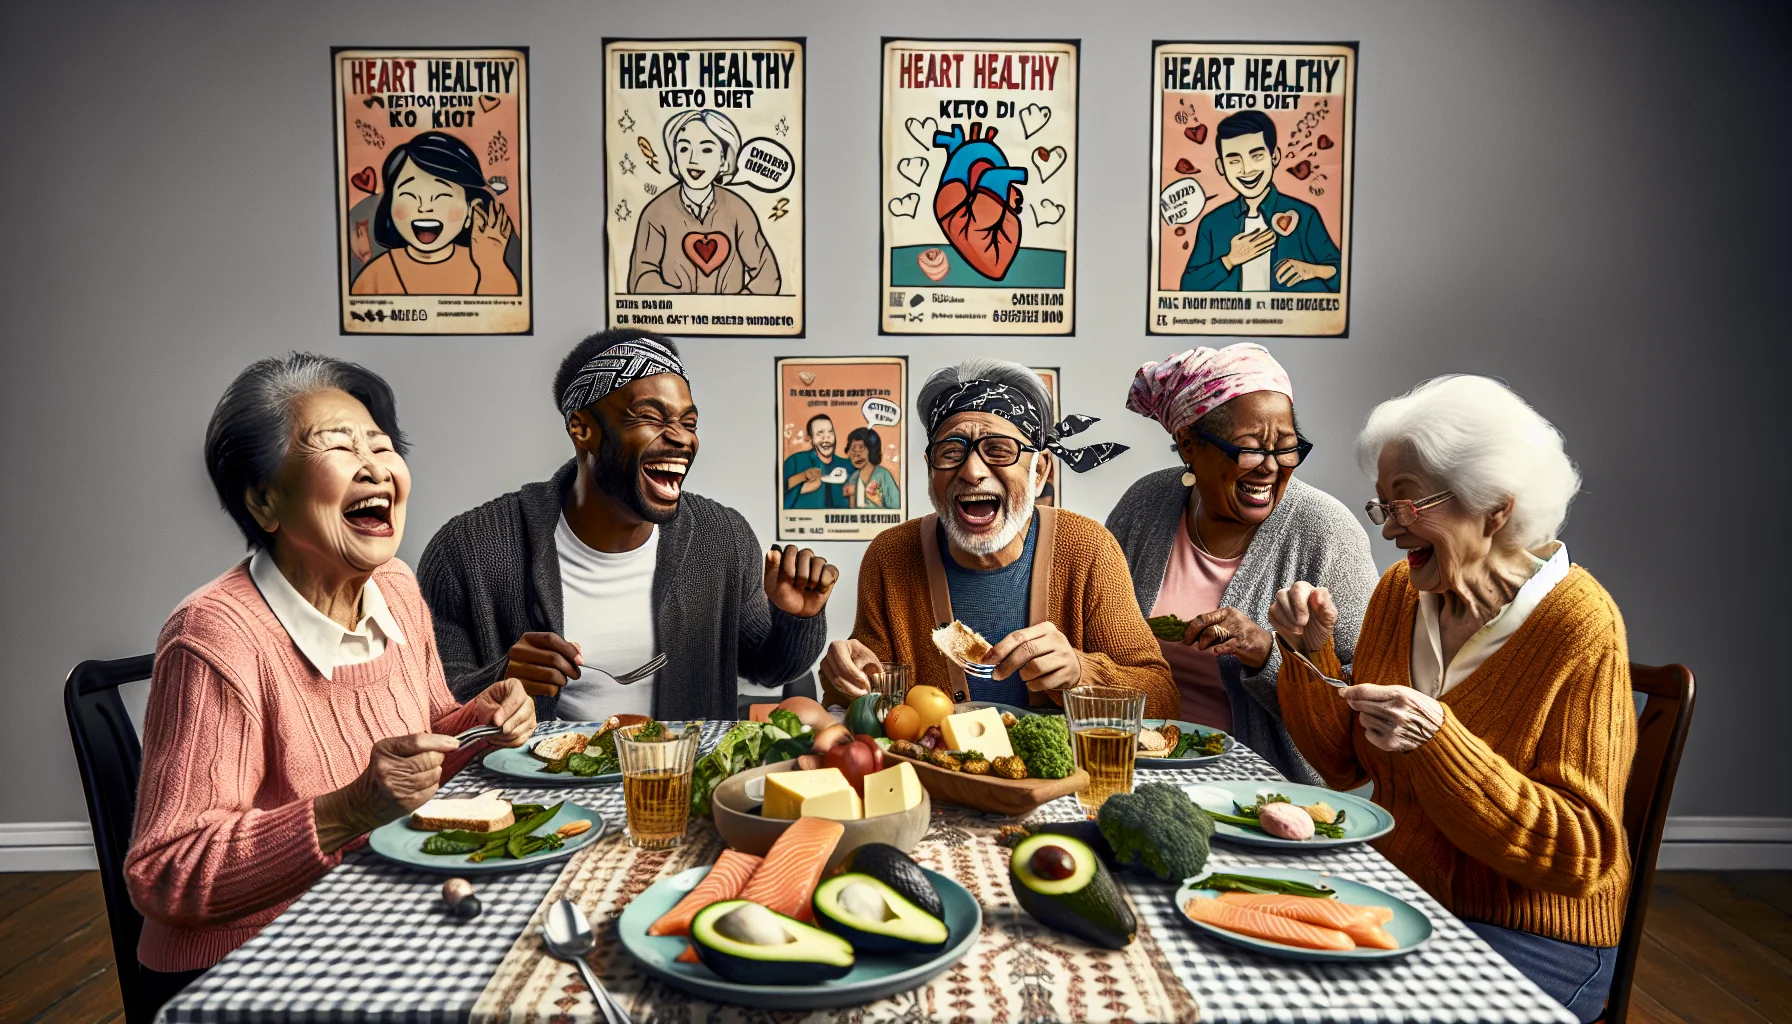 Generate a humorous, realistic scene where a group of diverse elderly individuals are engaged with a heart healthy keto diet. Picture a South Asian woman, a Black man, a Caucasian man, and a Middle-Eastern woman gathered around a table, laughing and enjoying their keto food. The table is laden with various keto-friendly dishes like avocados, salmon, lean meats, green vegetables, and cheeses. A poster in the background humorously promotes the benefits of the diet, with puns and funny illustrations about heart health and nutrition. Their expressions are animated, showcasing the fun and enjoyment they're having while adhering to a healthy diet.